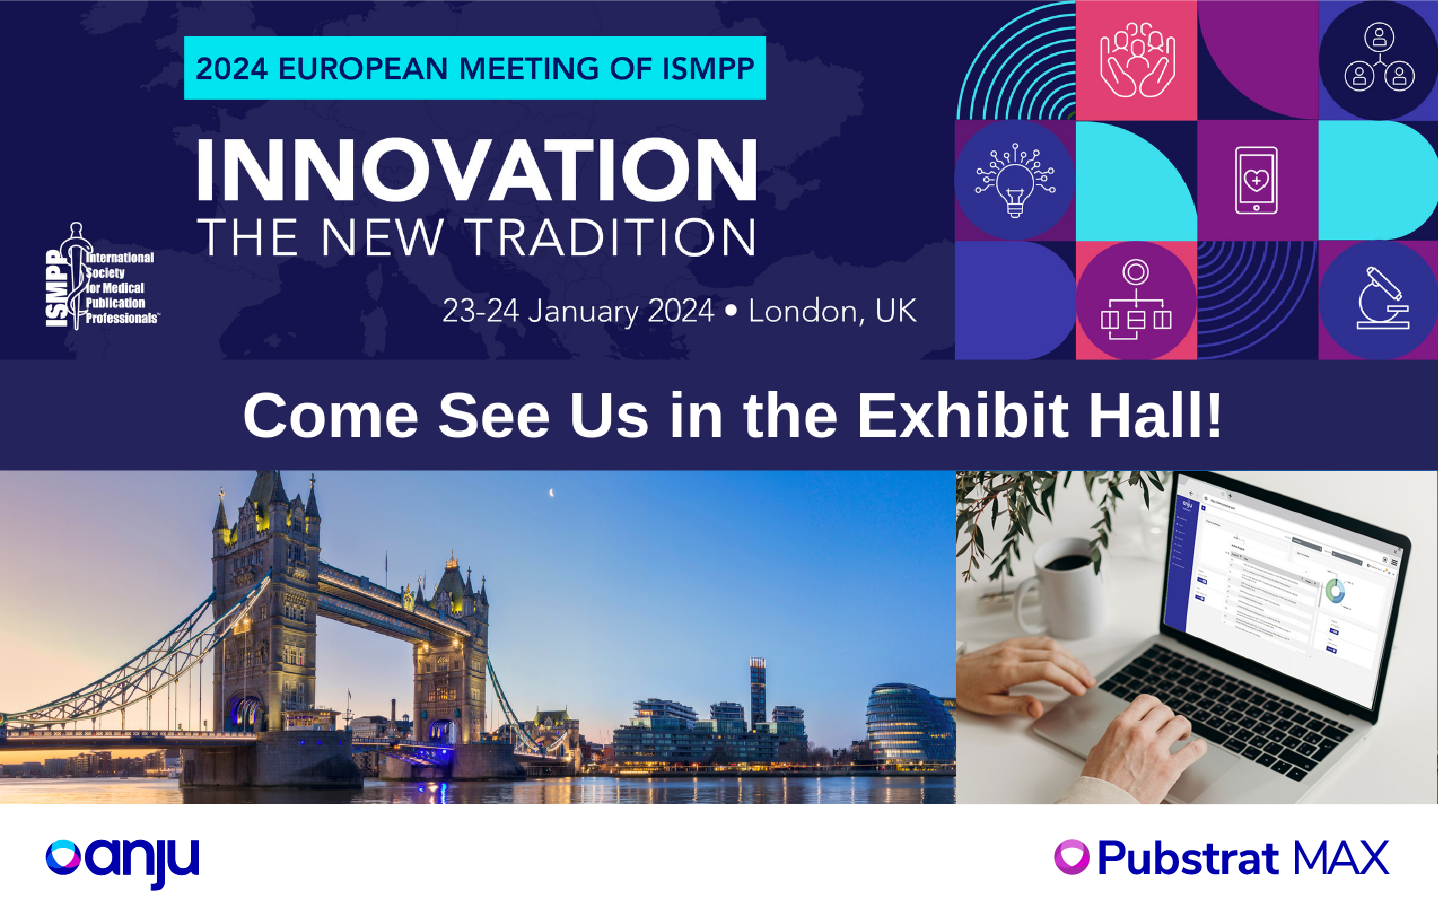 ISMPP Europe 2024 2024 European Meeting of ISMPP, the International Society for Medical Publication Professionals Innovation, the new tradition January 23-24, 2024 London, UK Come see us in the exhibit hall! Pubstrat MAX publication planning software